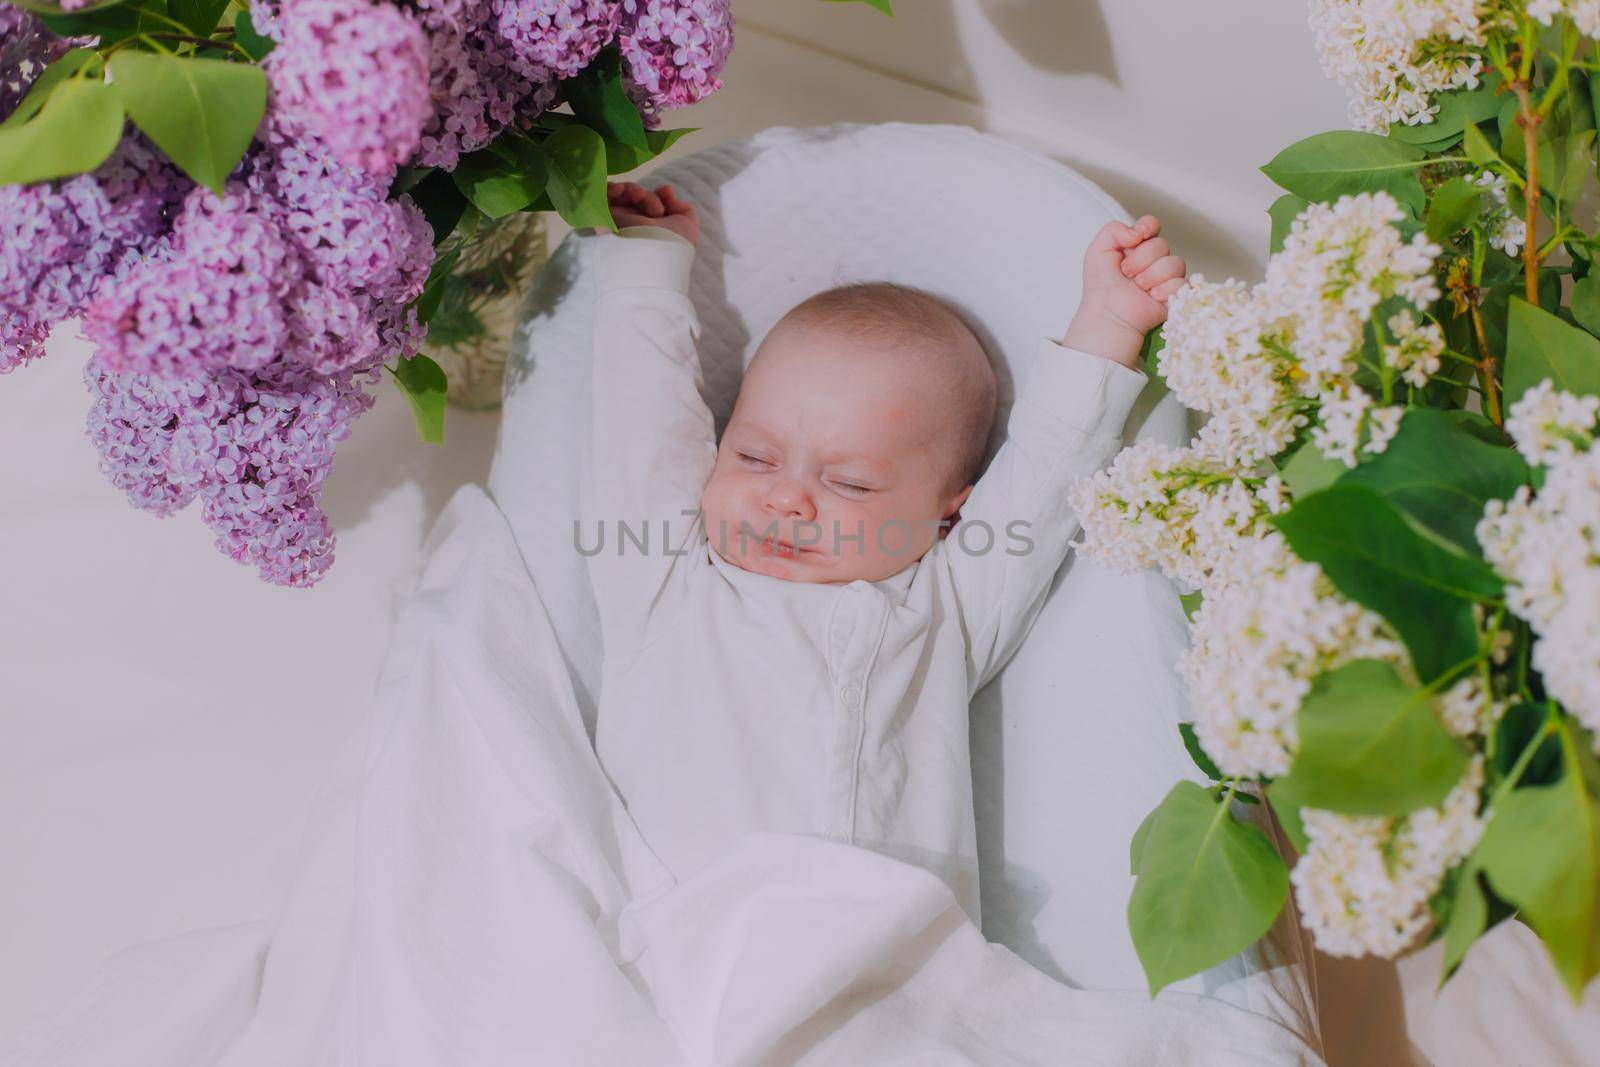 The baby stretches after sleeping Lifestyle . A happy child. Children's article. by alenka2194